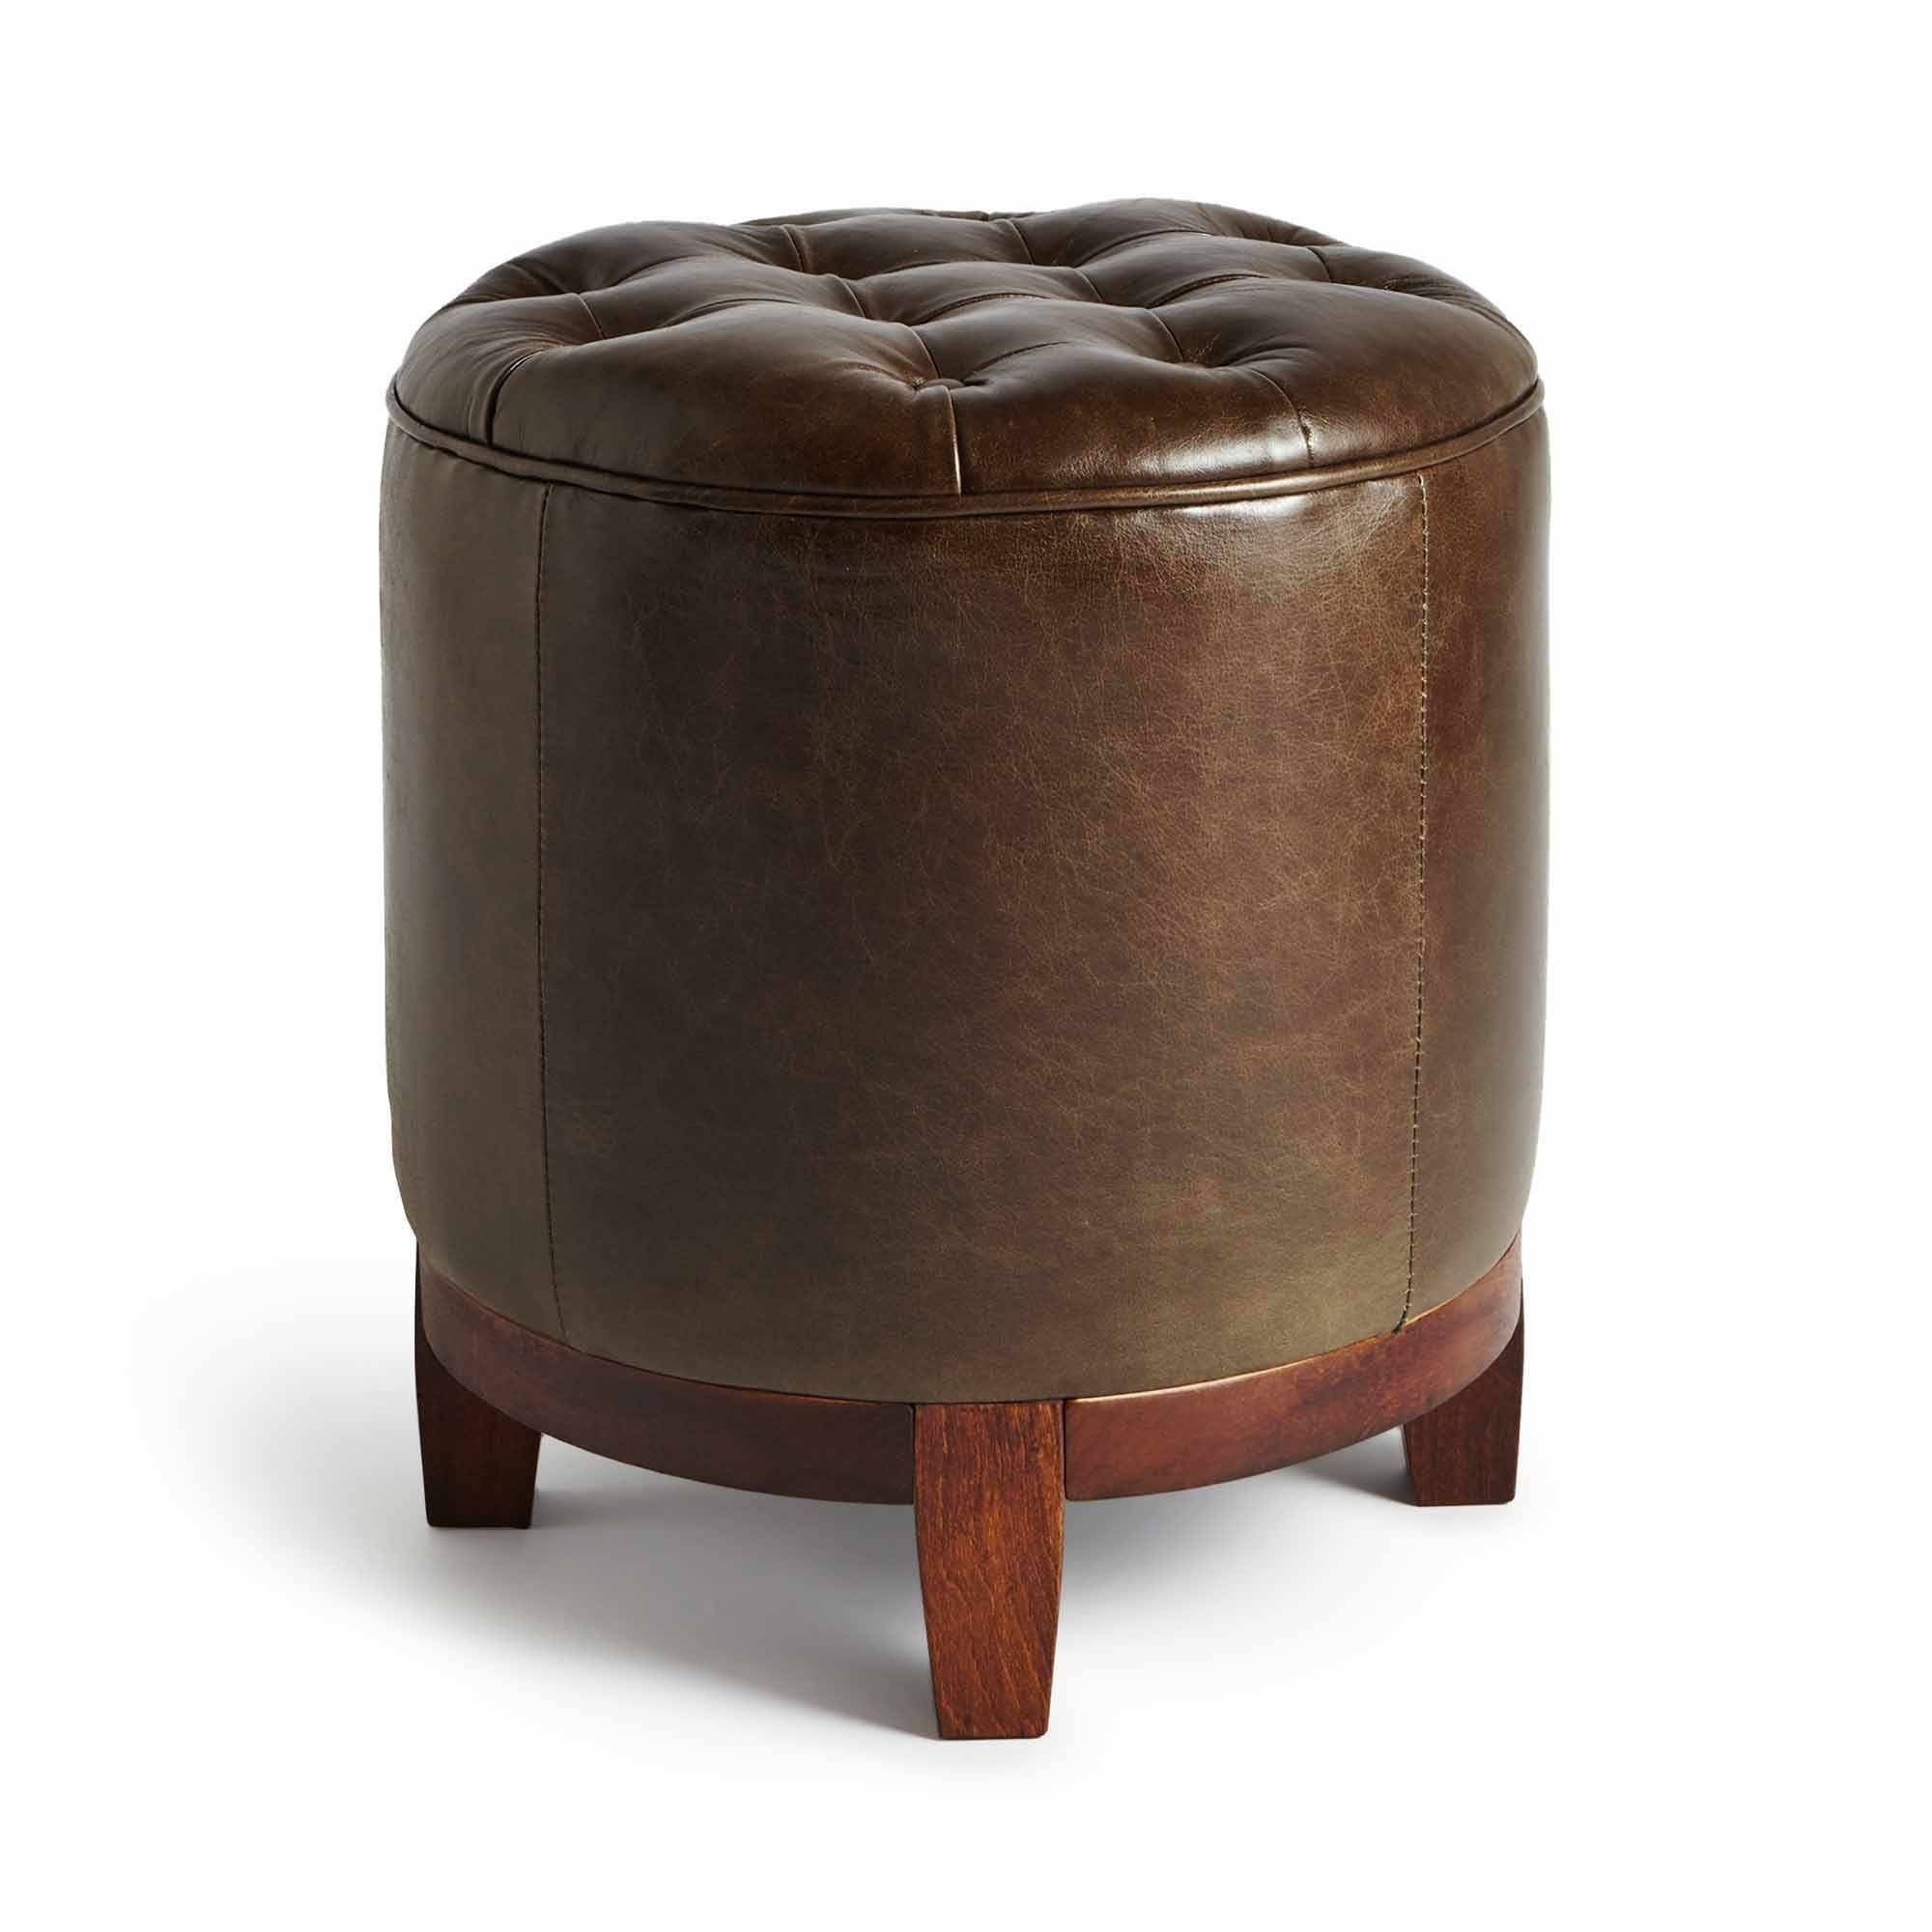 Prince Street Round Footstool, Evergreen Leather Regarding Leather Footstools (View 19 of 30)